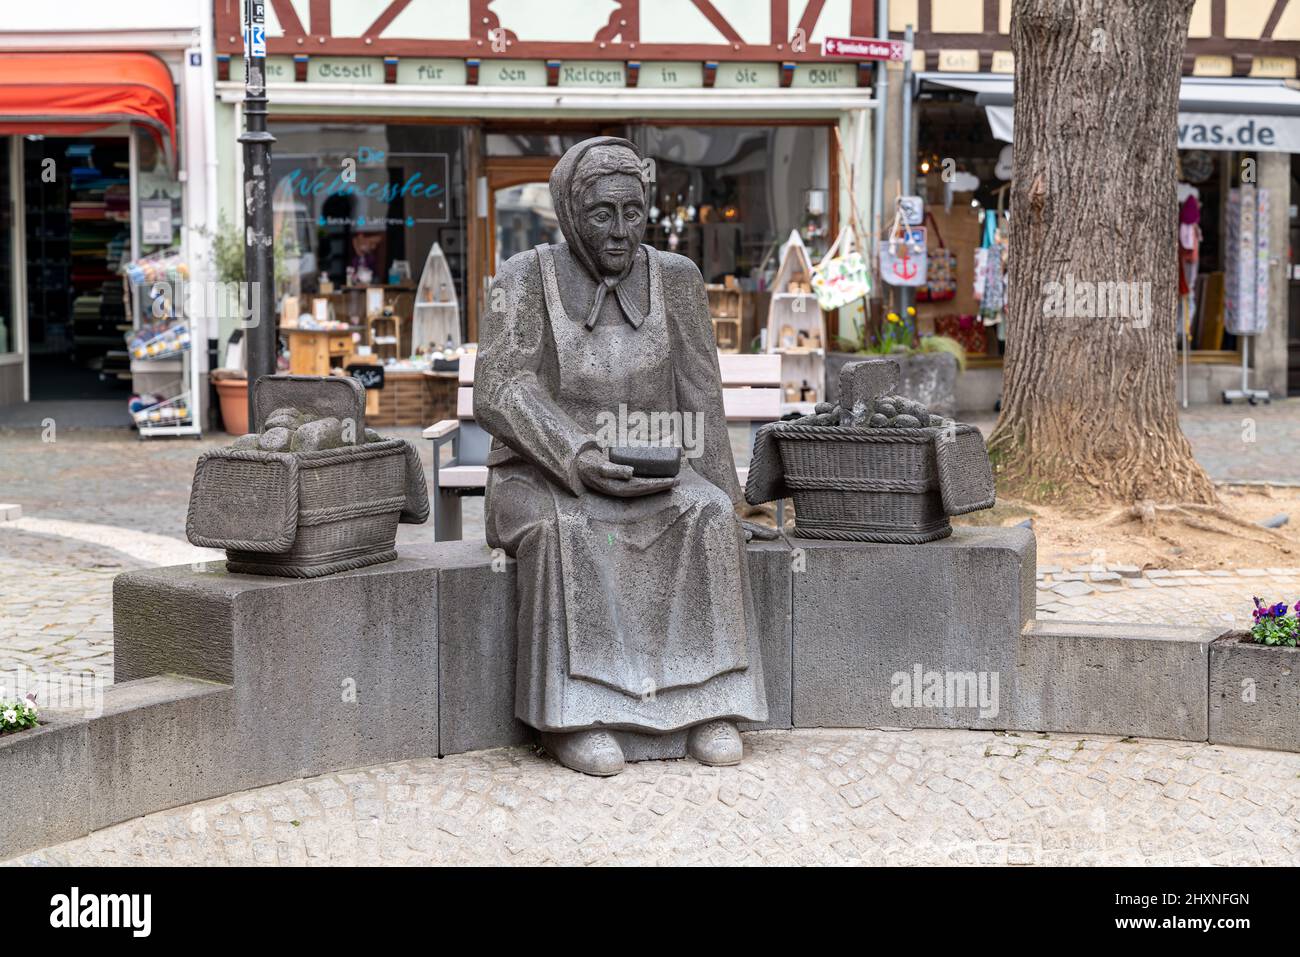 Linz am Rhein, Germany - 2022-03-12: Statue of Market-woman 'Agnes', waiting for customers at butter market Stock Photo